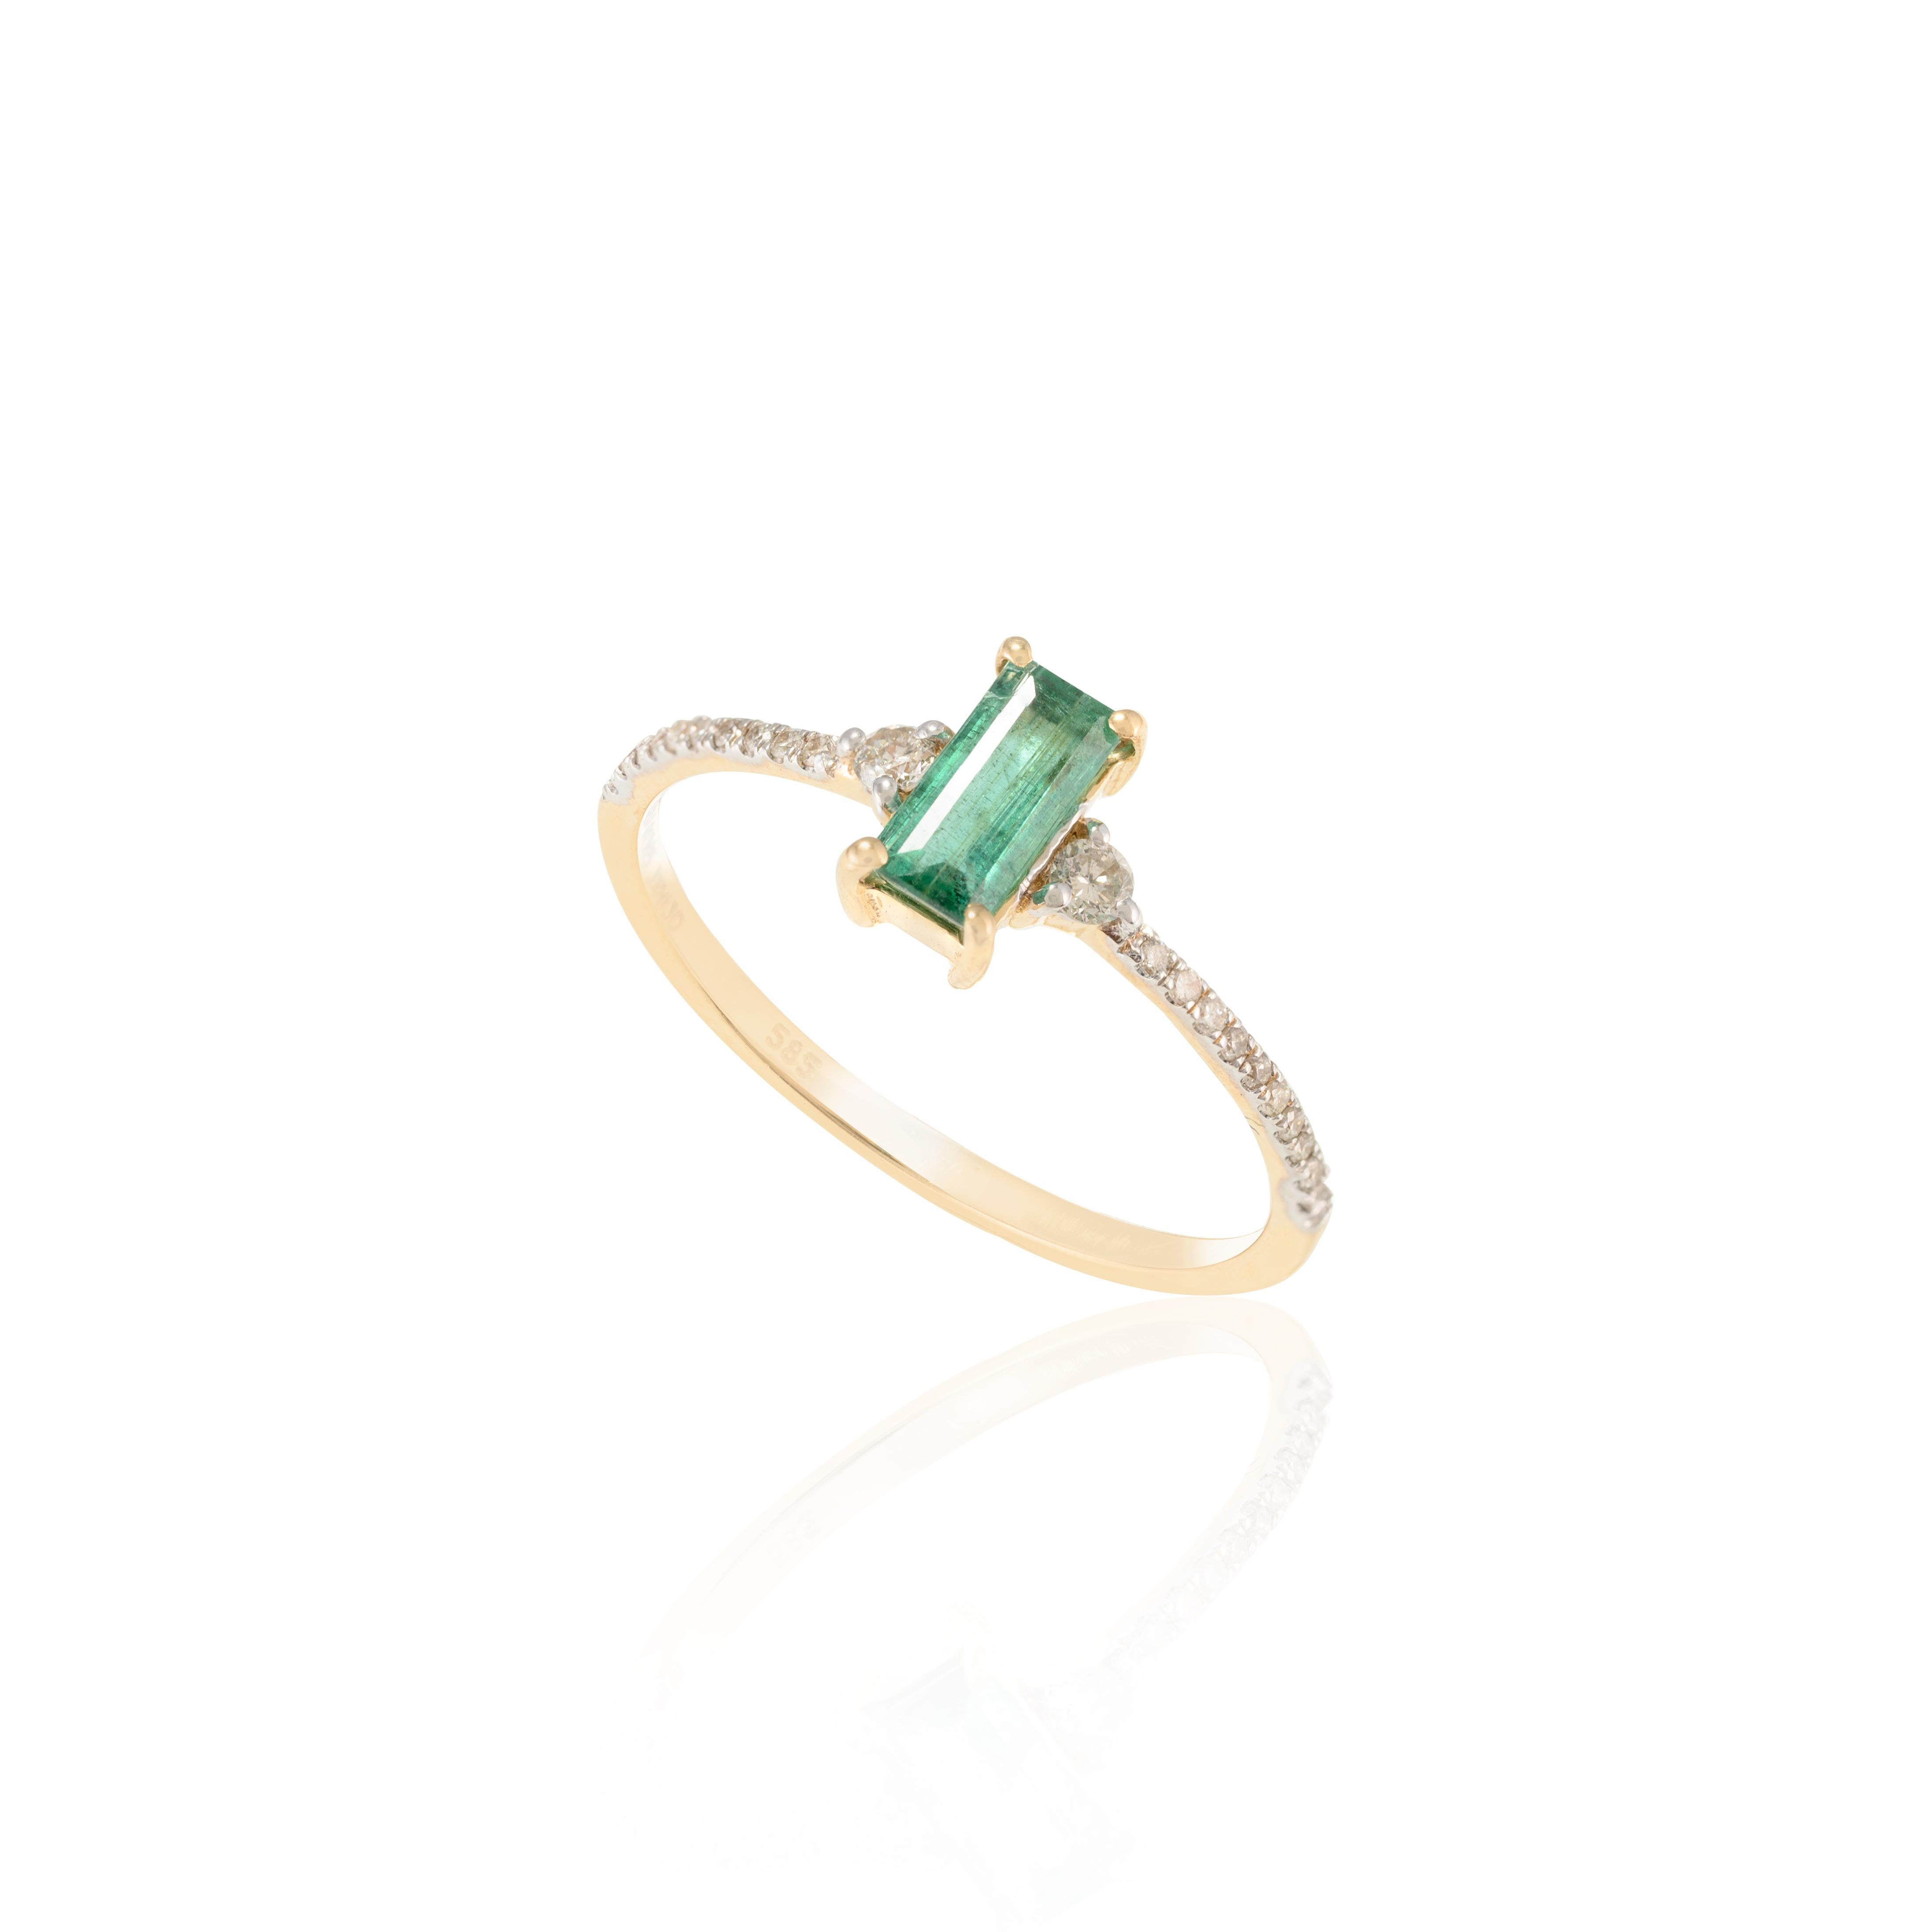 For Sale:  Minimalist Emerald and Diamond Everyday Ring 14k Solid Yellow Gold 4